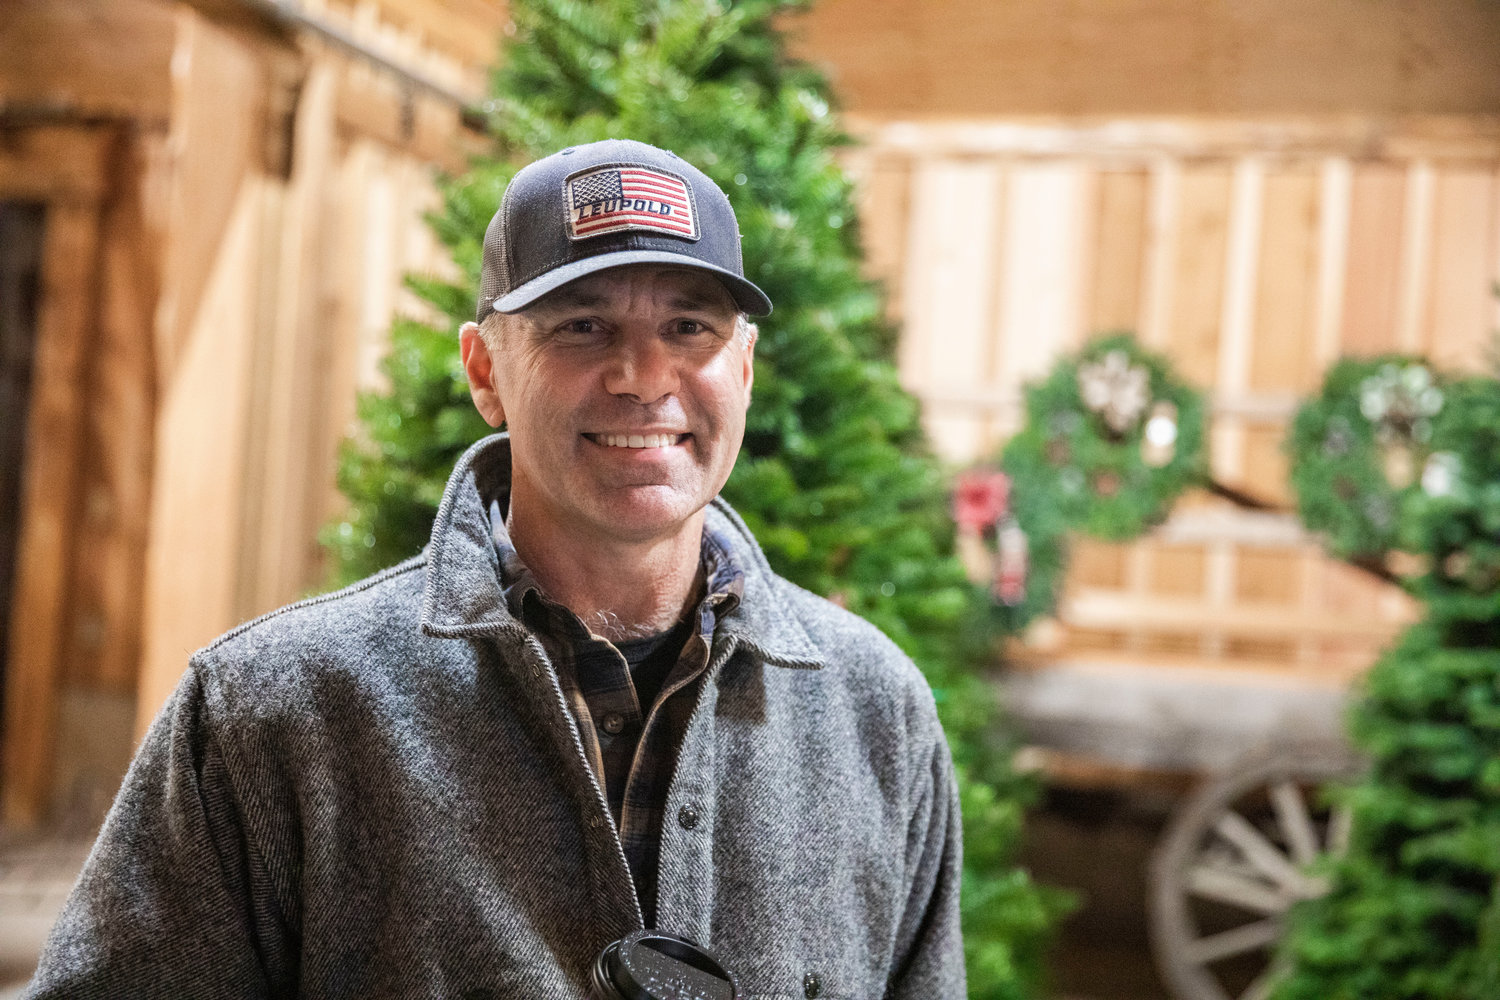 Pat Murphy, who co-owns the Mistletoe Tree Farm with his wife Missy, smiles for a photo Friday evening.